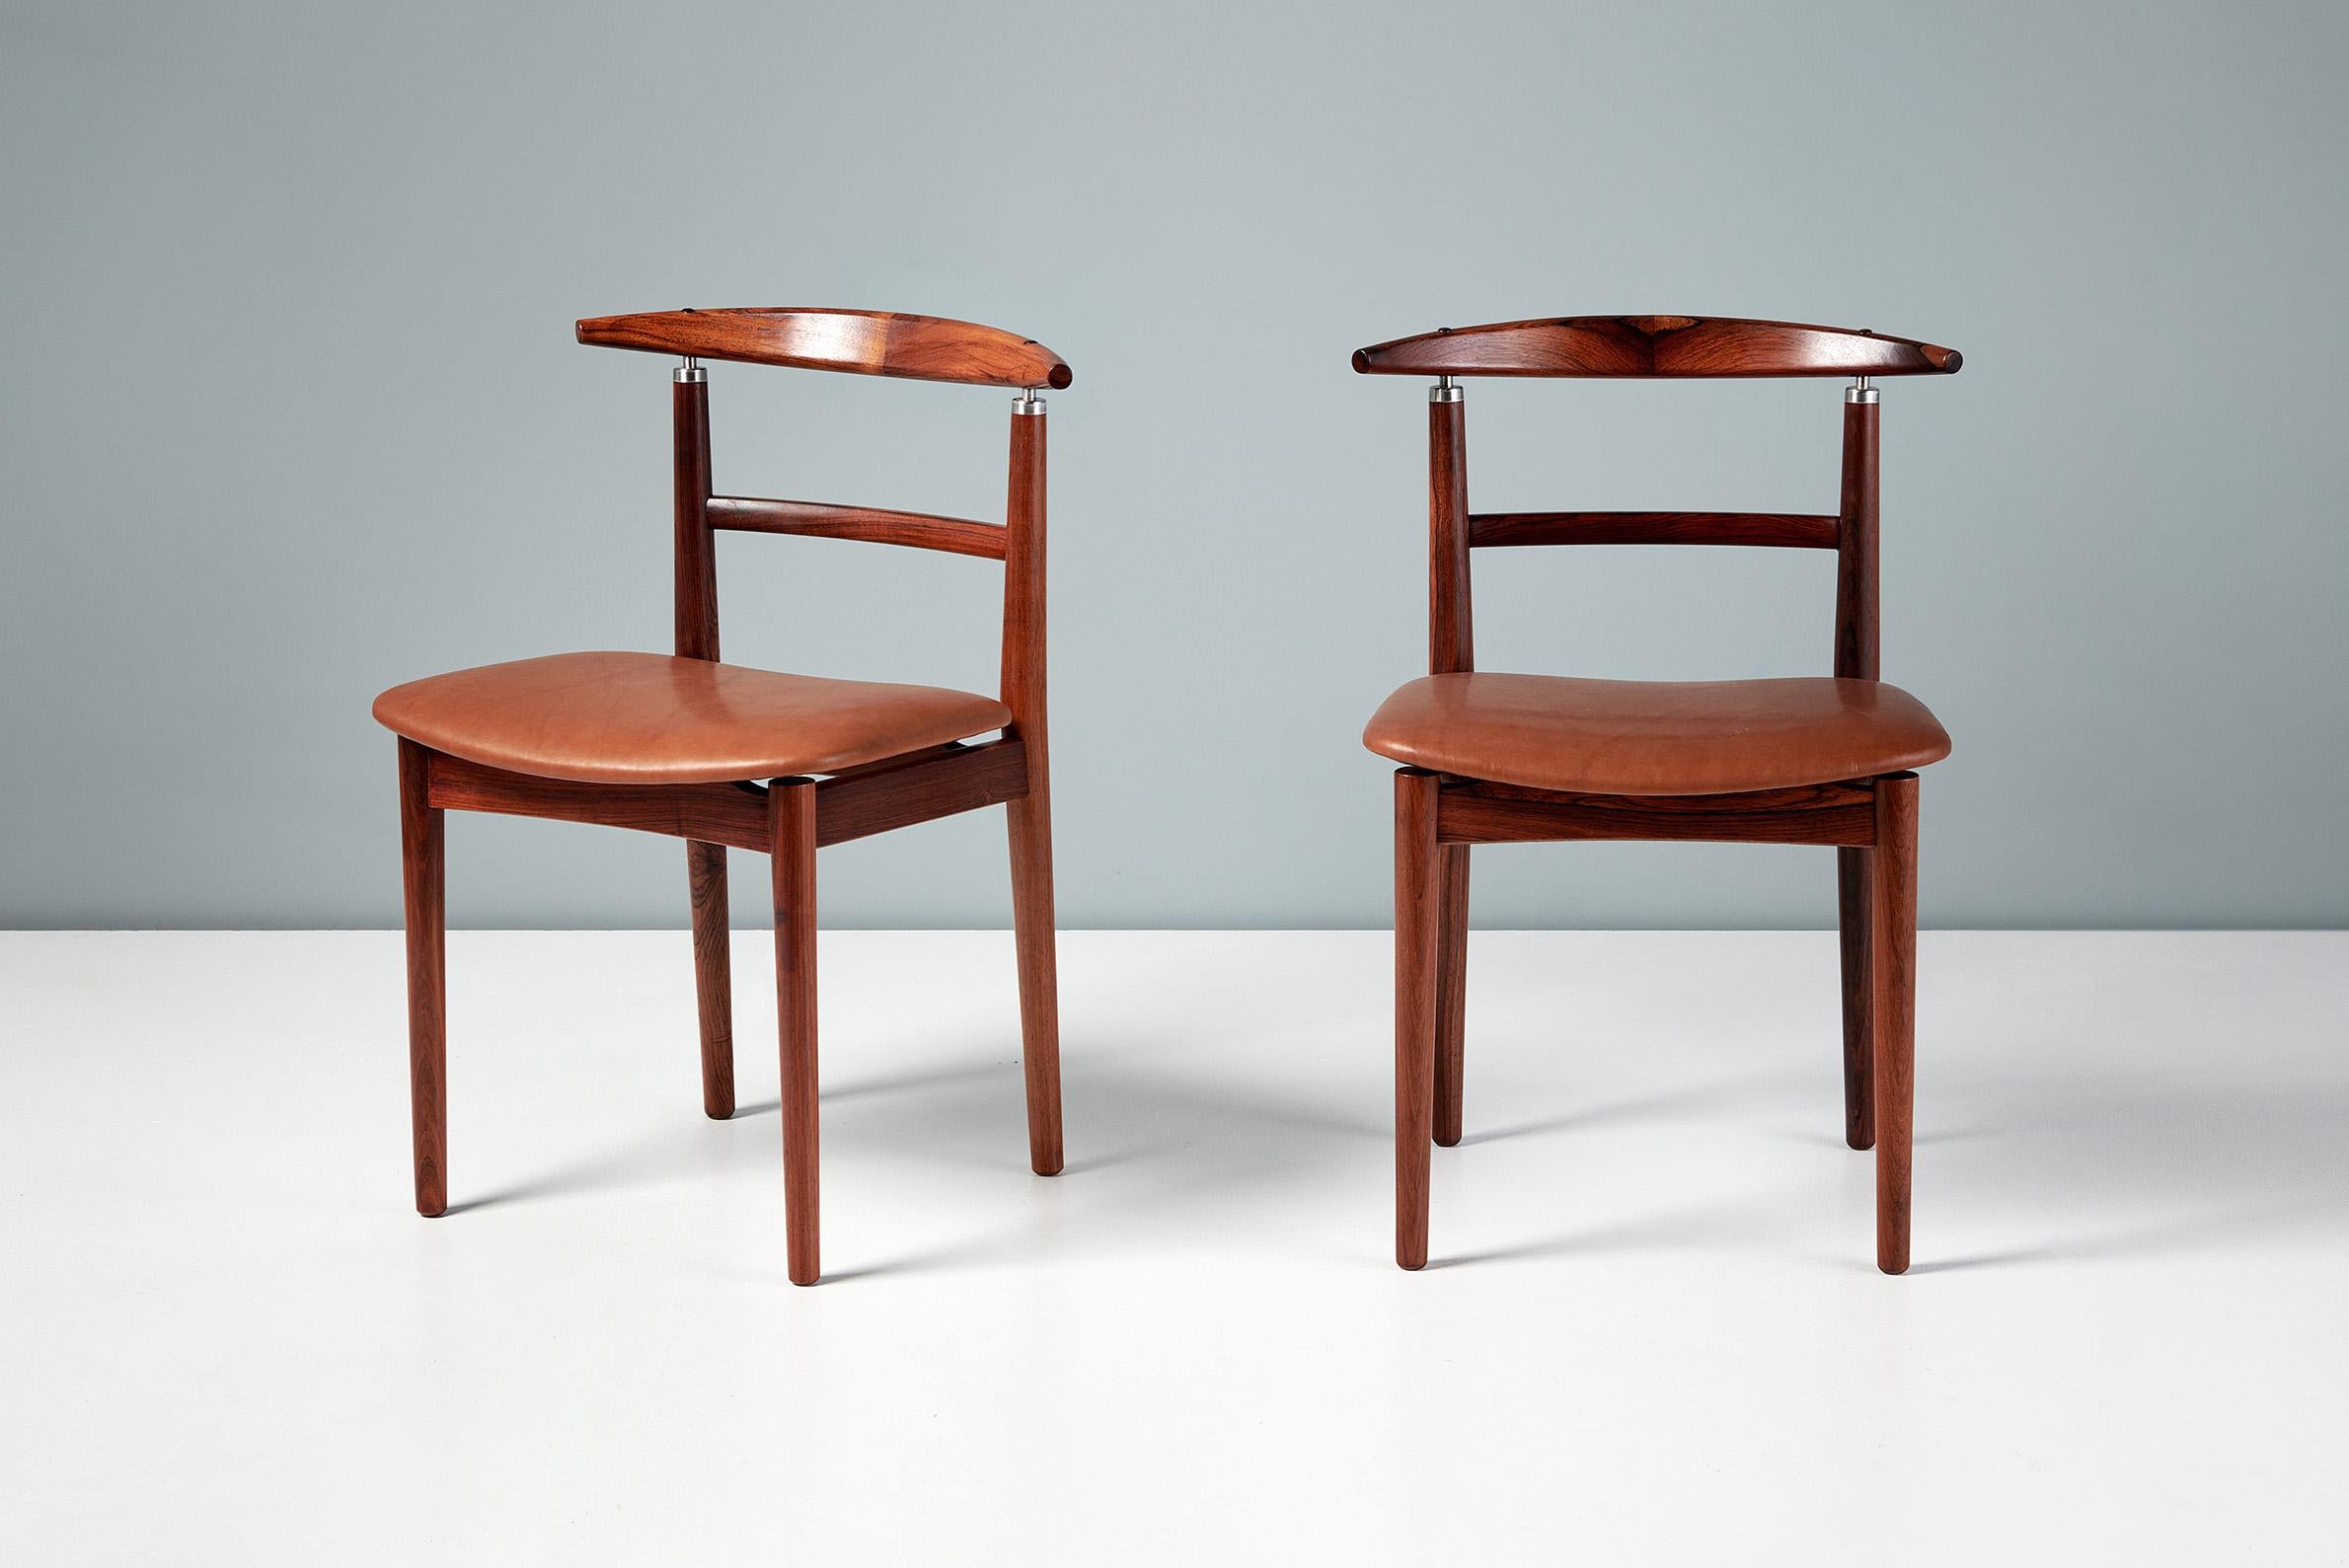 Borge Rammeskov Set of 8 Danish Rosewood Dining Chairs, c1960s For Sale 4